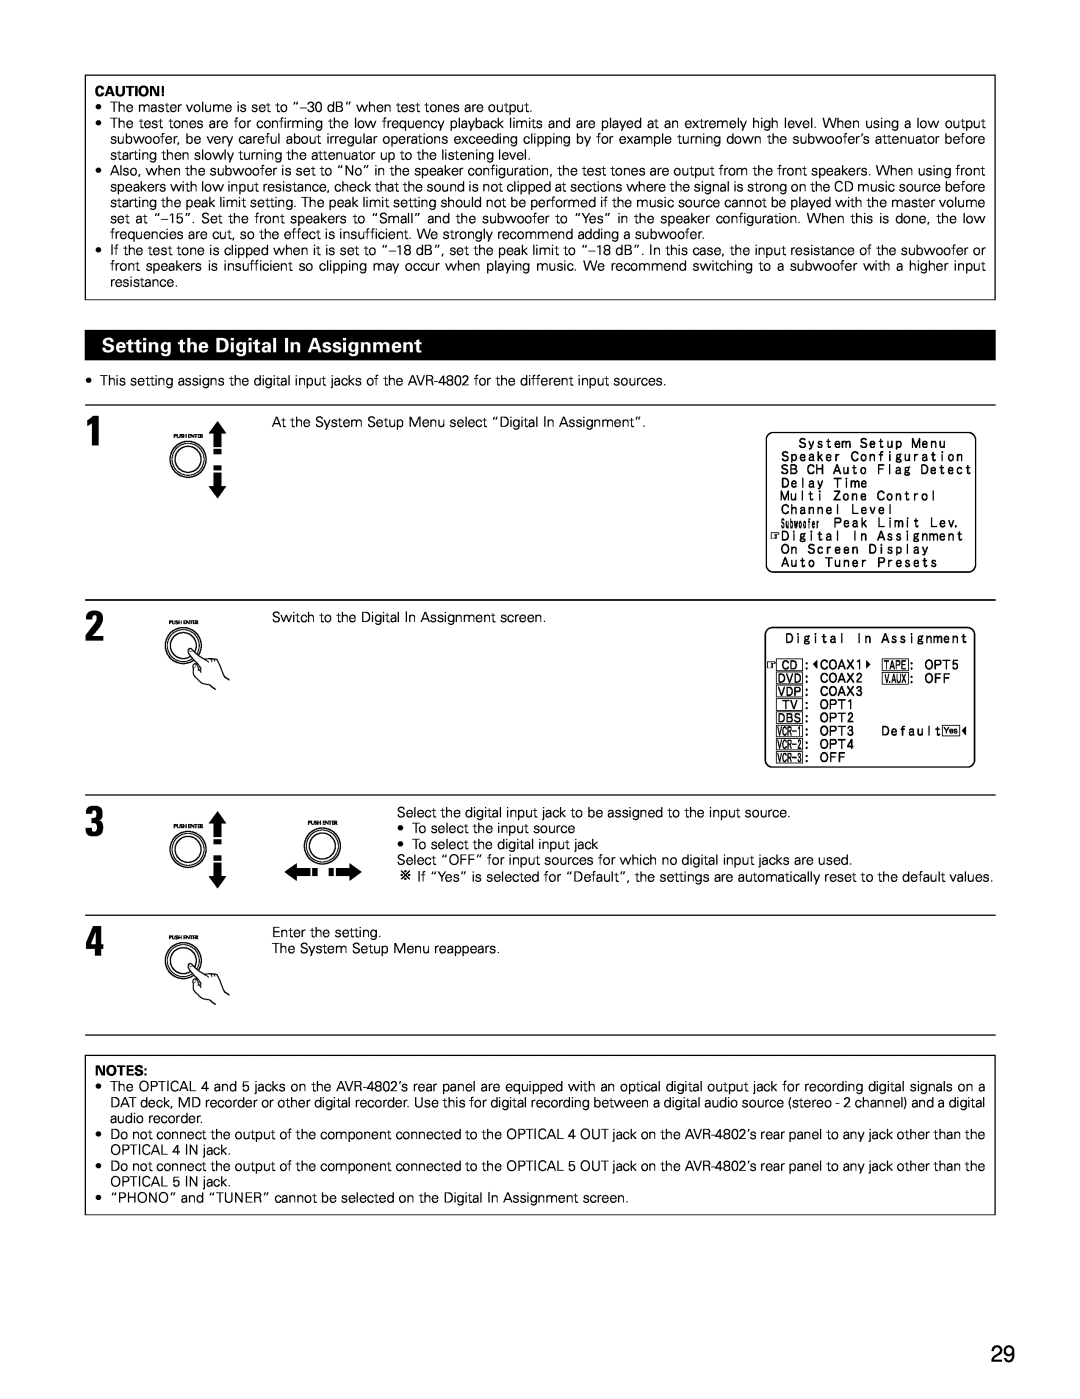 Denon AVR-4802 manual Setting the Digital In Assignment, 2 3 4, Notes 